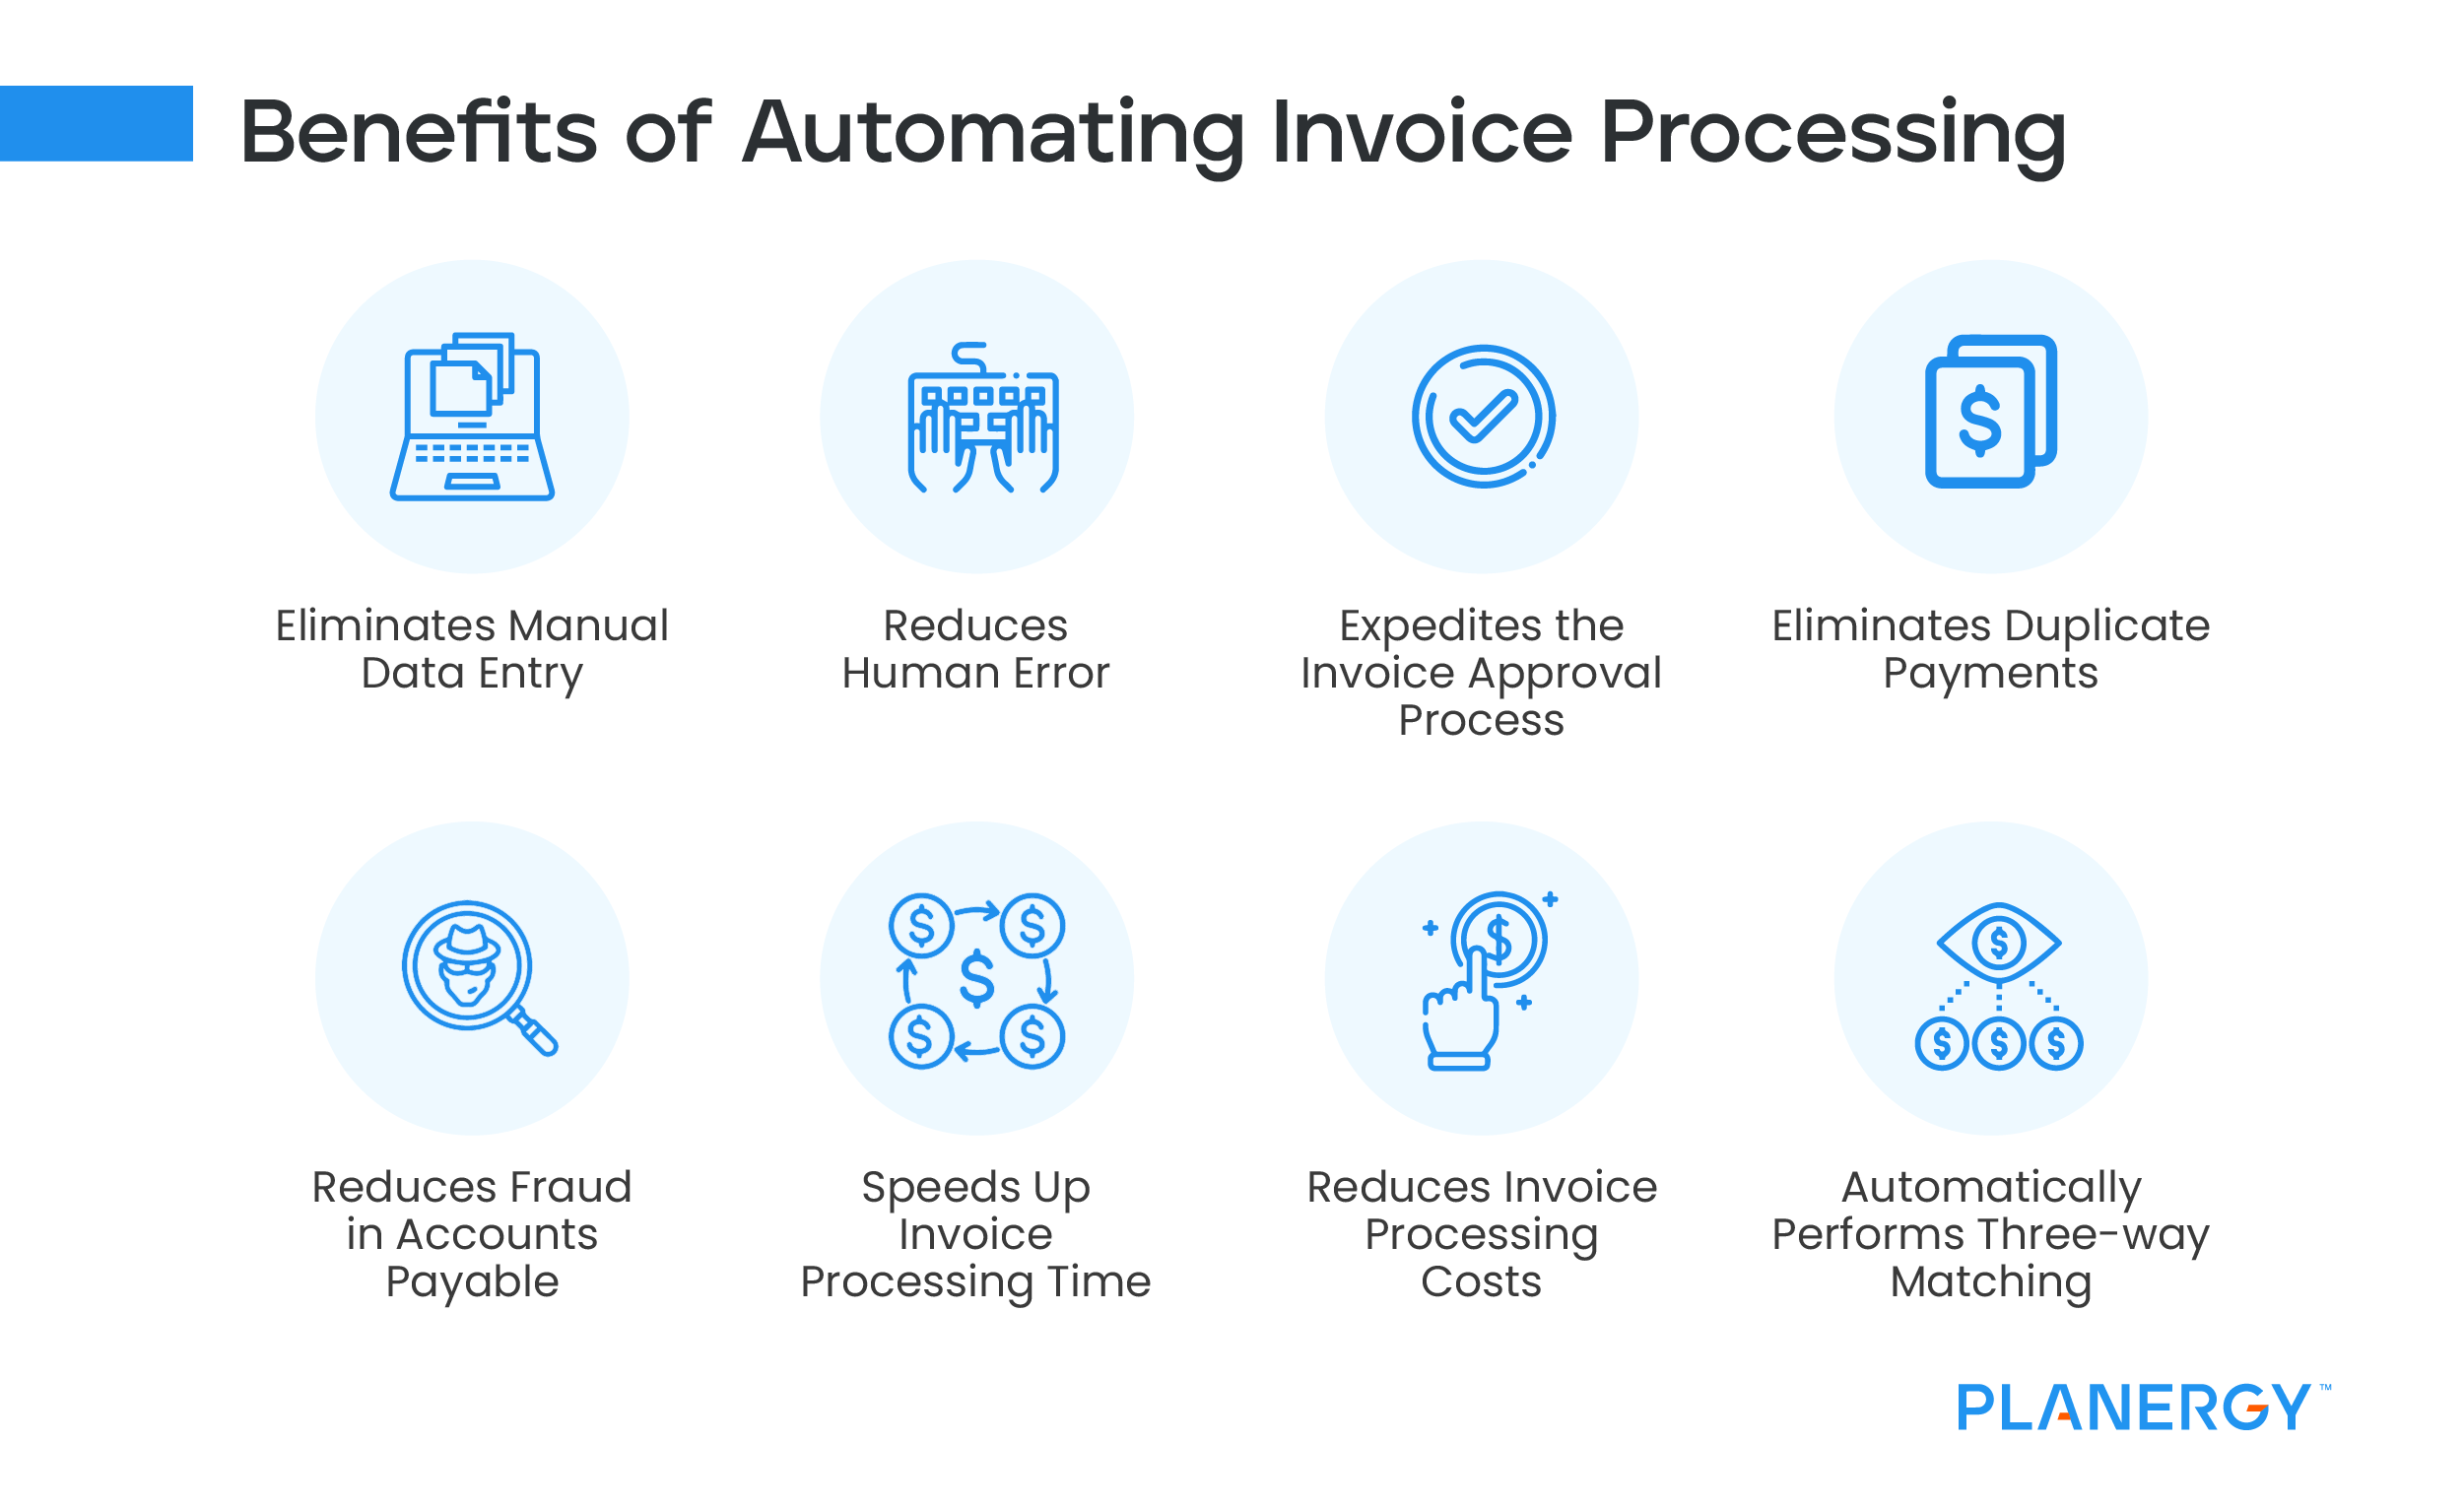 Benefits of Automating Business Processing